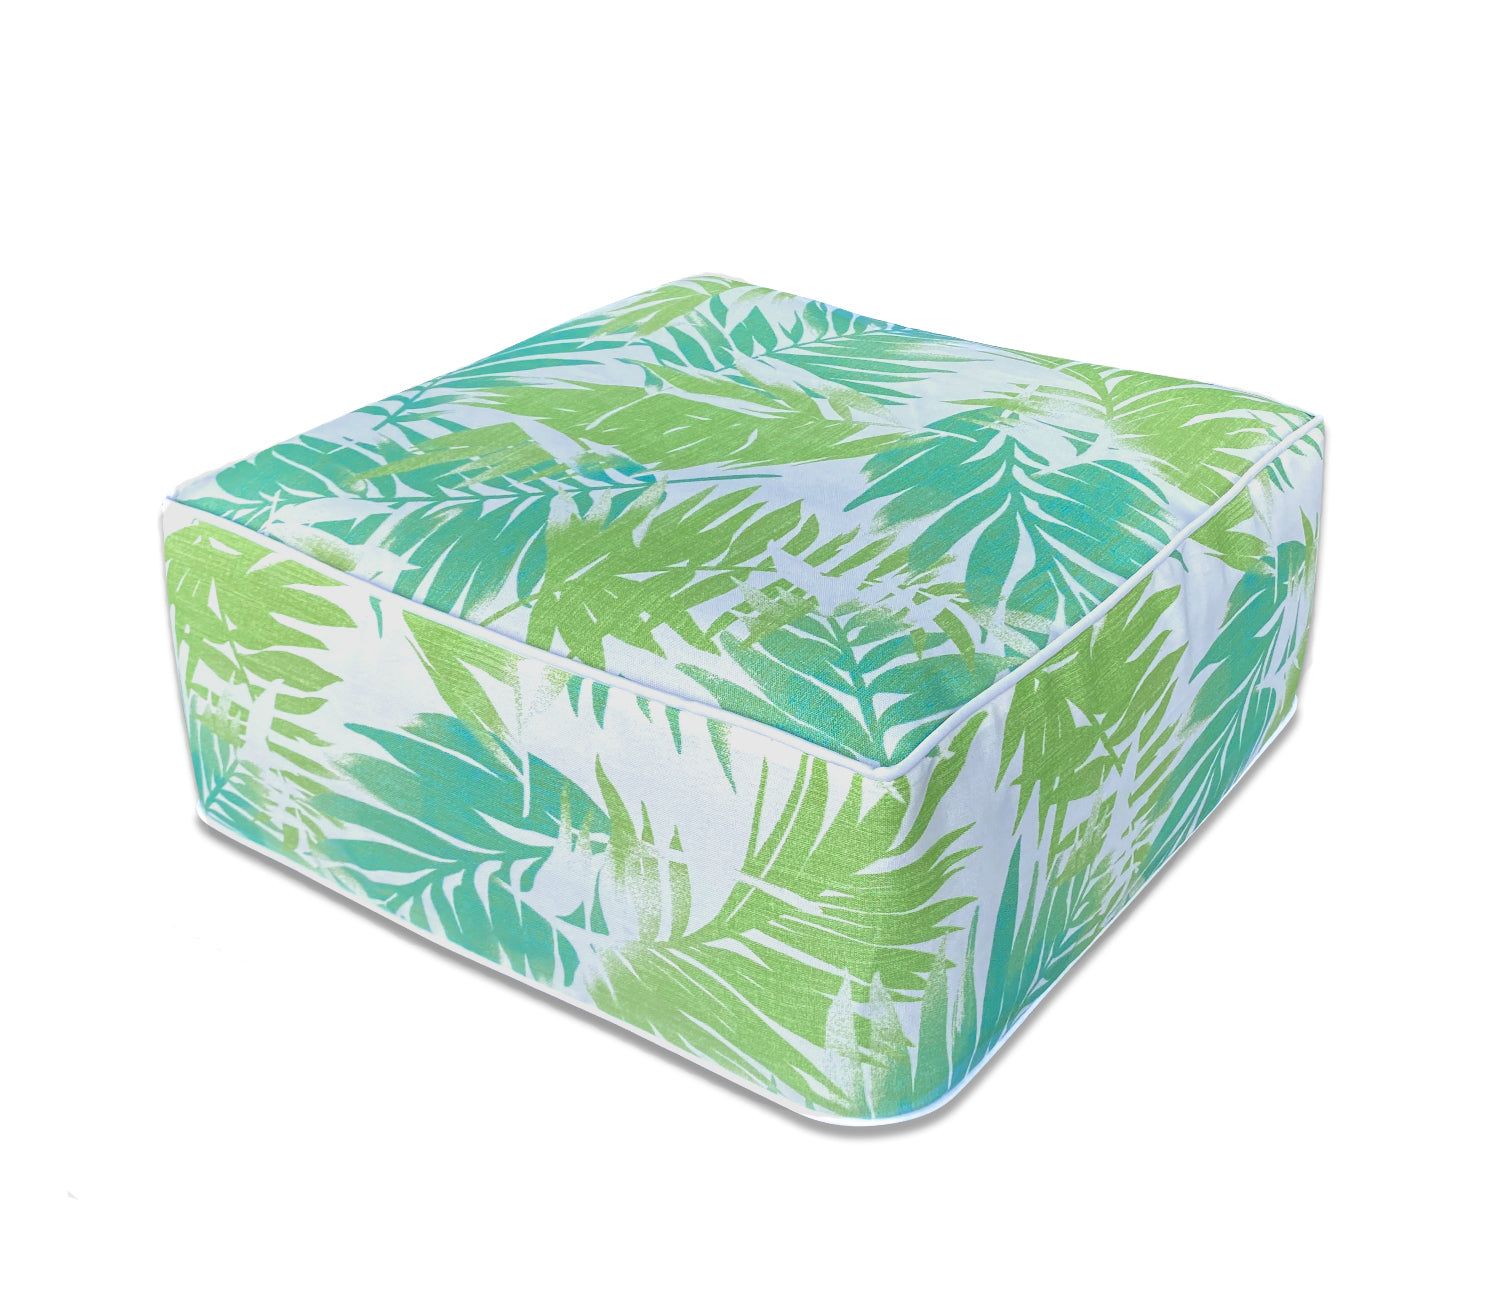 Outdoor Inflatable Ottoman Green Leaf Square 23x23x9 Inch Patio Foot Stools and Ottomans